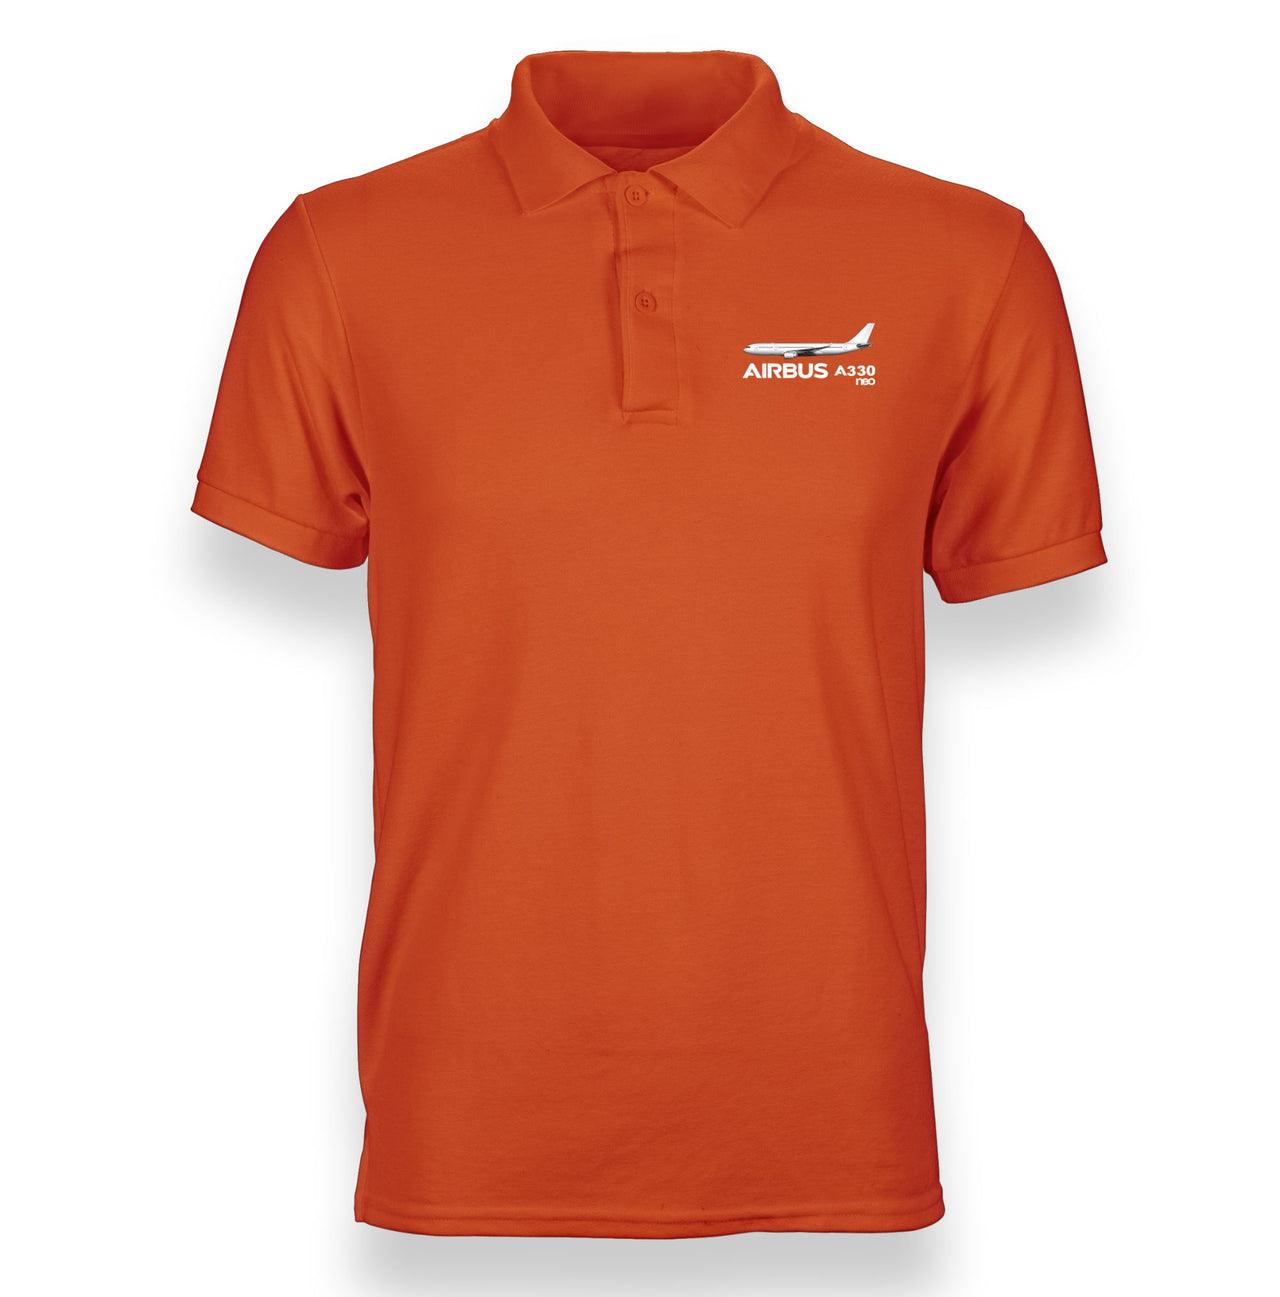 The Airbus A330neo Designed "WOMEN" Polo T-Shirts